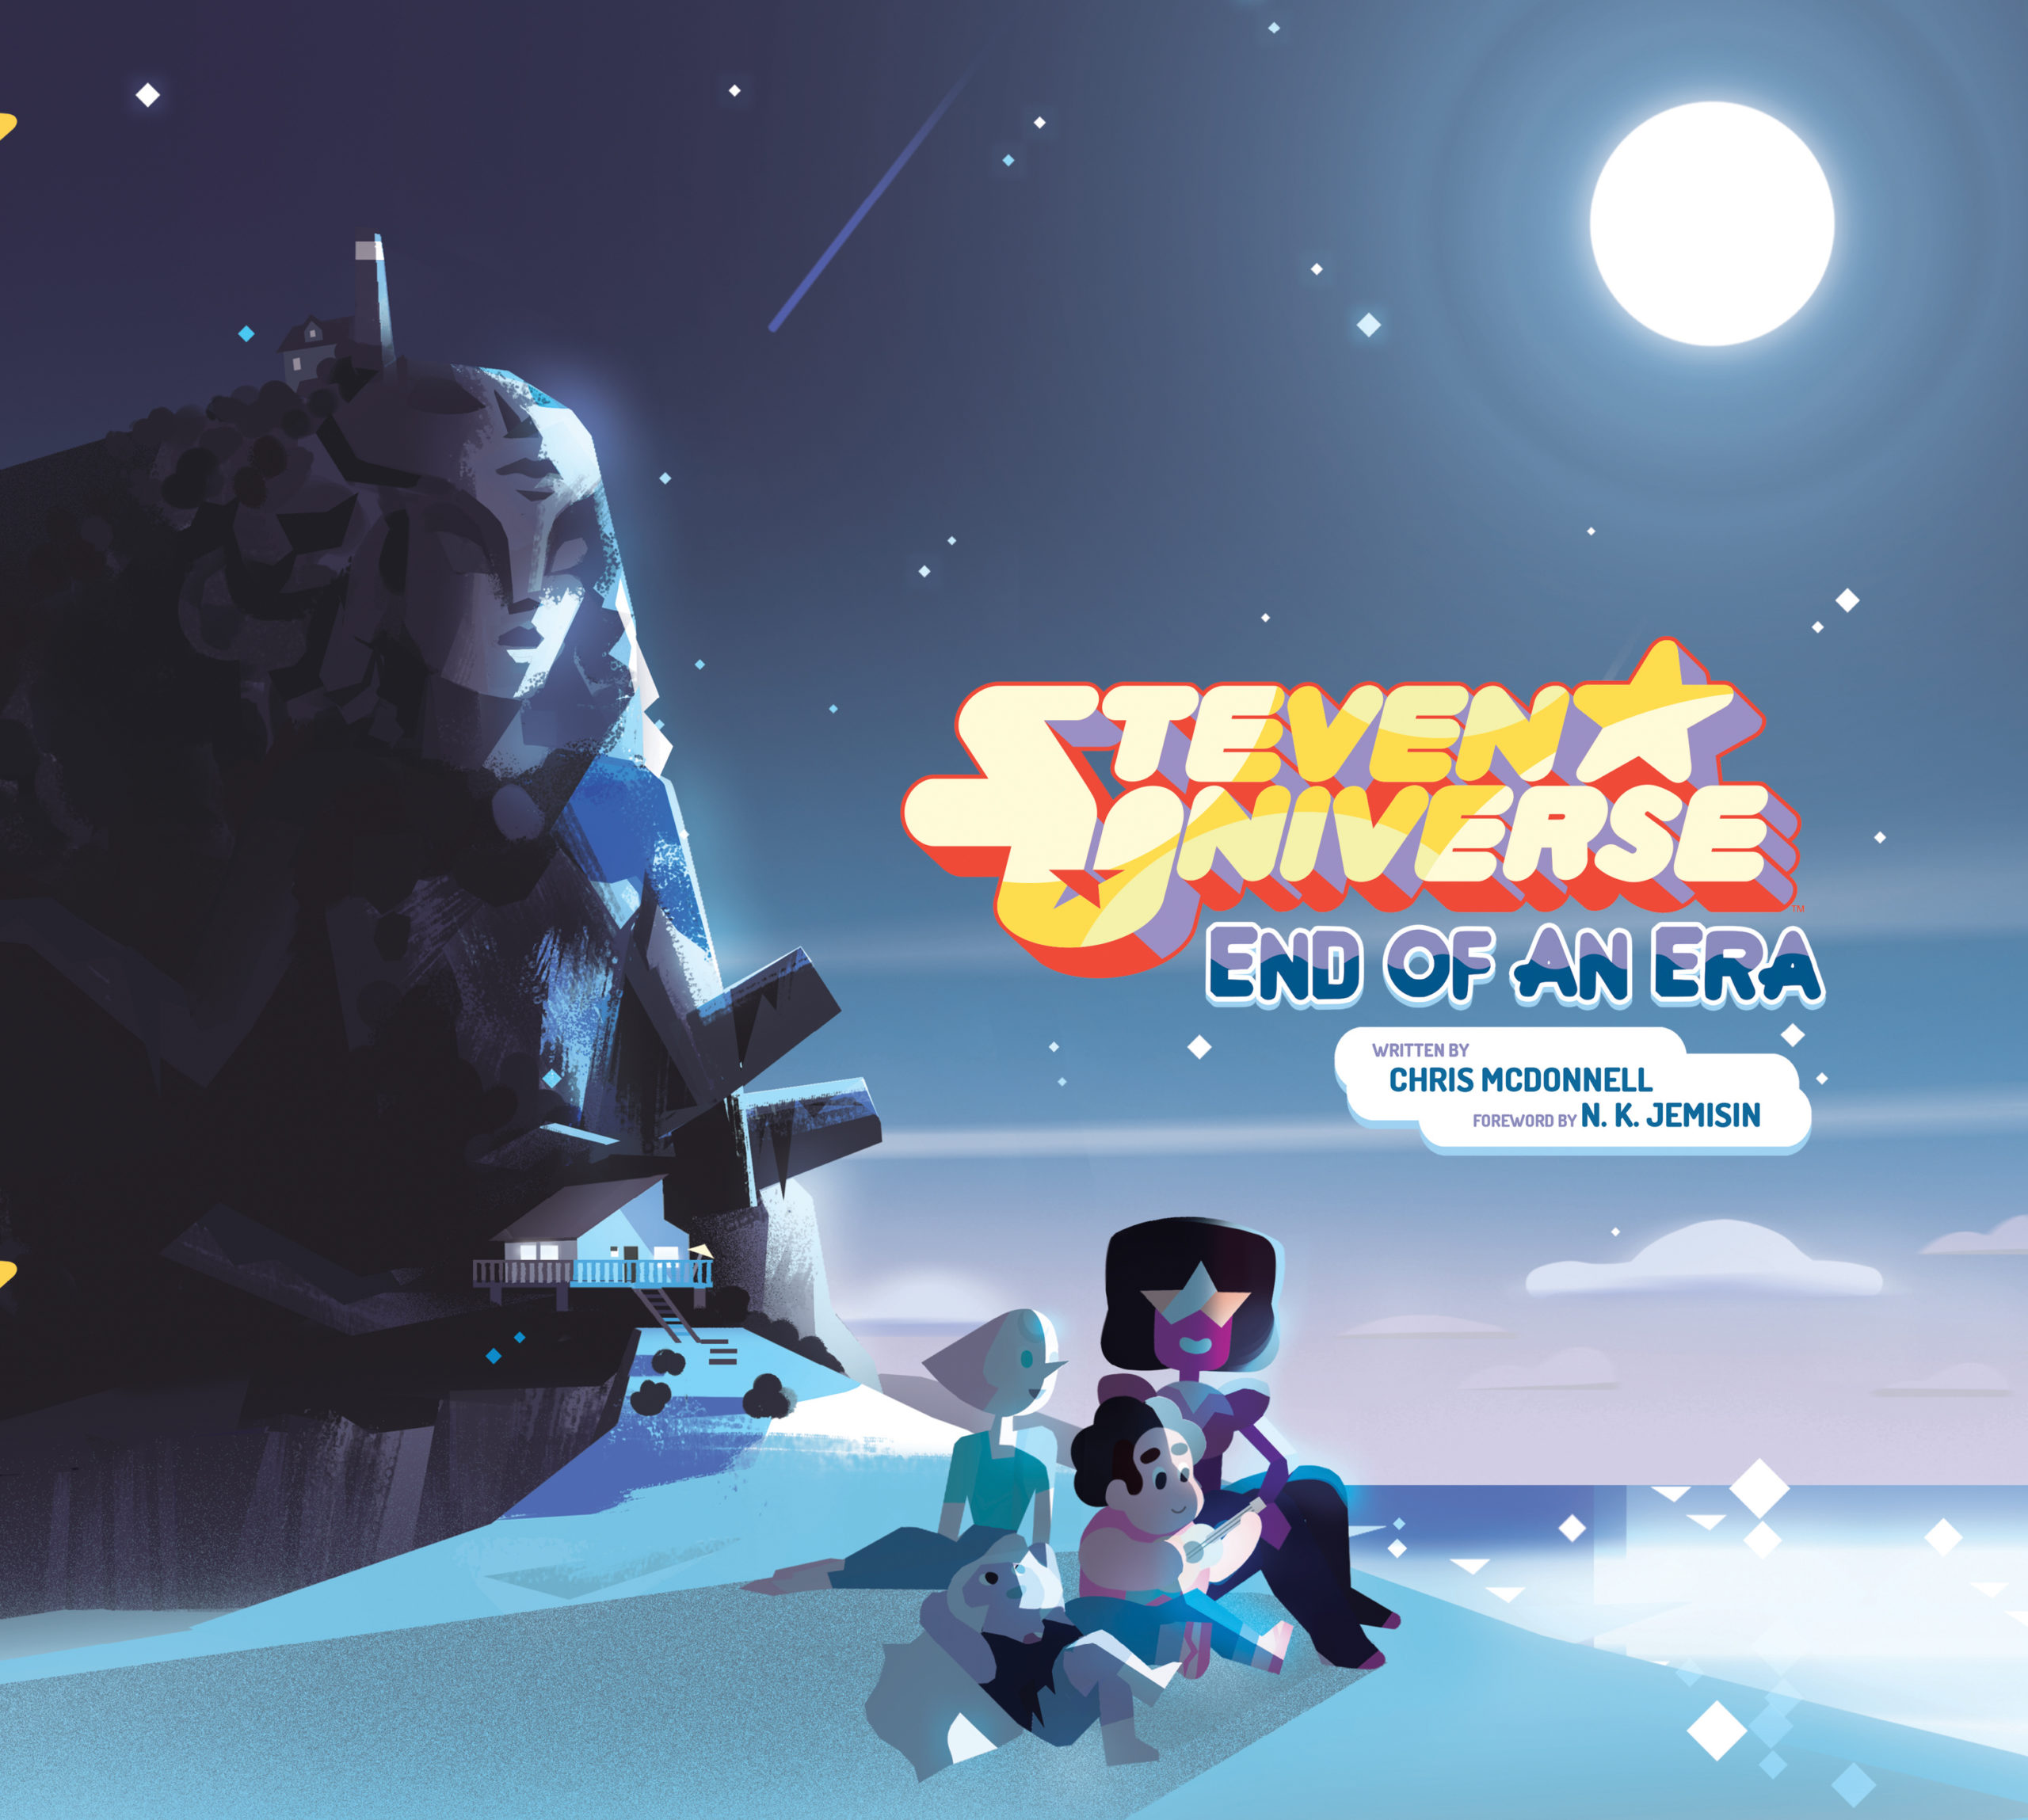 Pearl, Amethyst, Steven, and Garnet as they appear on the cover of Steven Universe: End of an Era. (Illustration: Abrams)